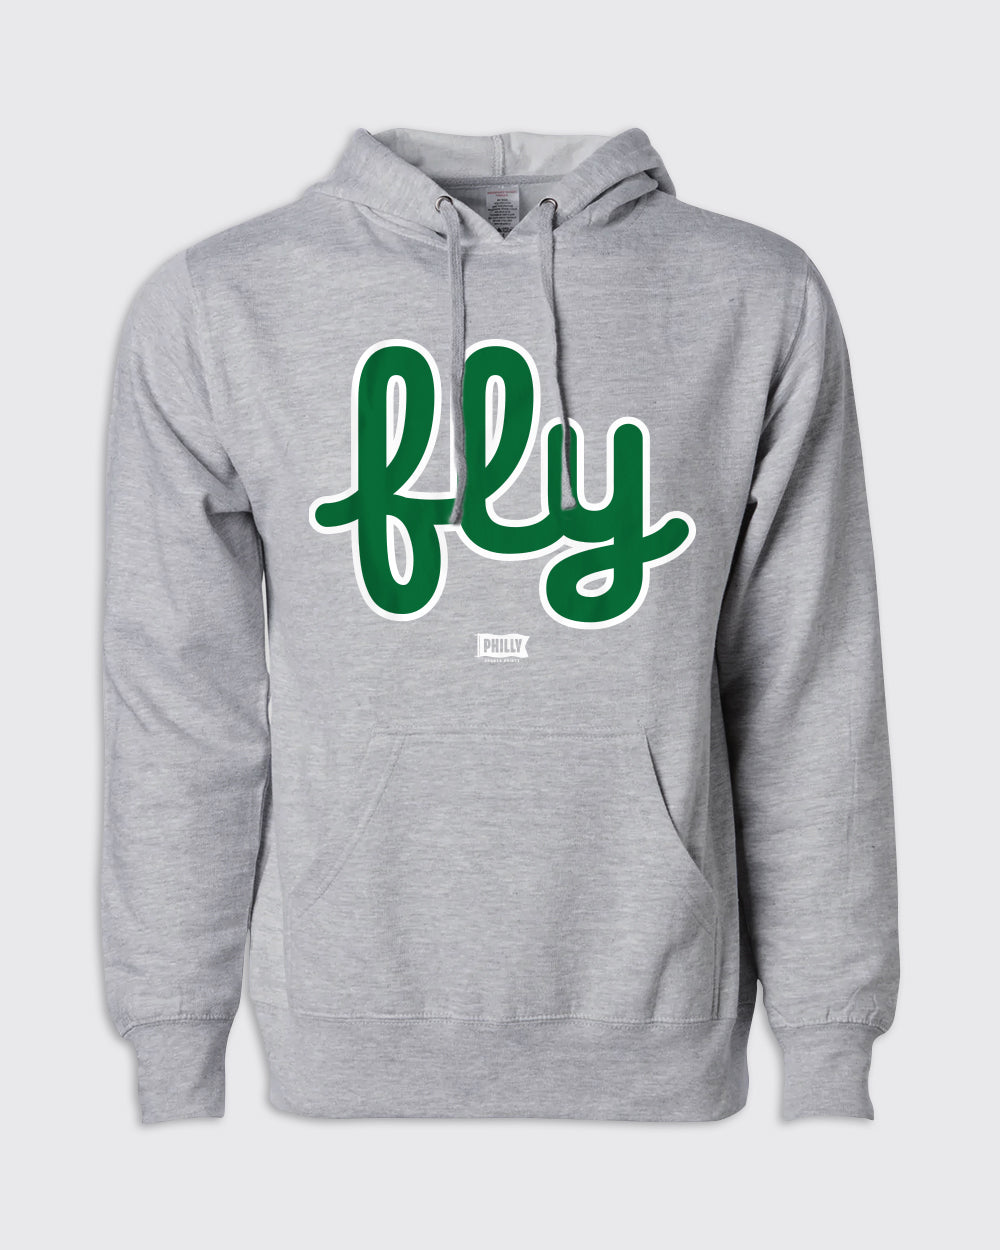 Eagles Fly Hoodie - Eagles, Hoodies - Philly Sports Shirts